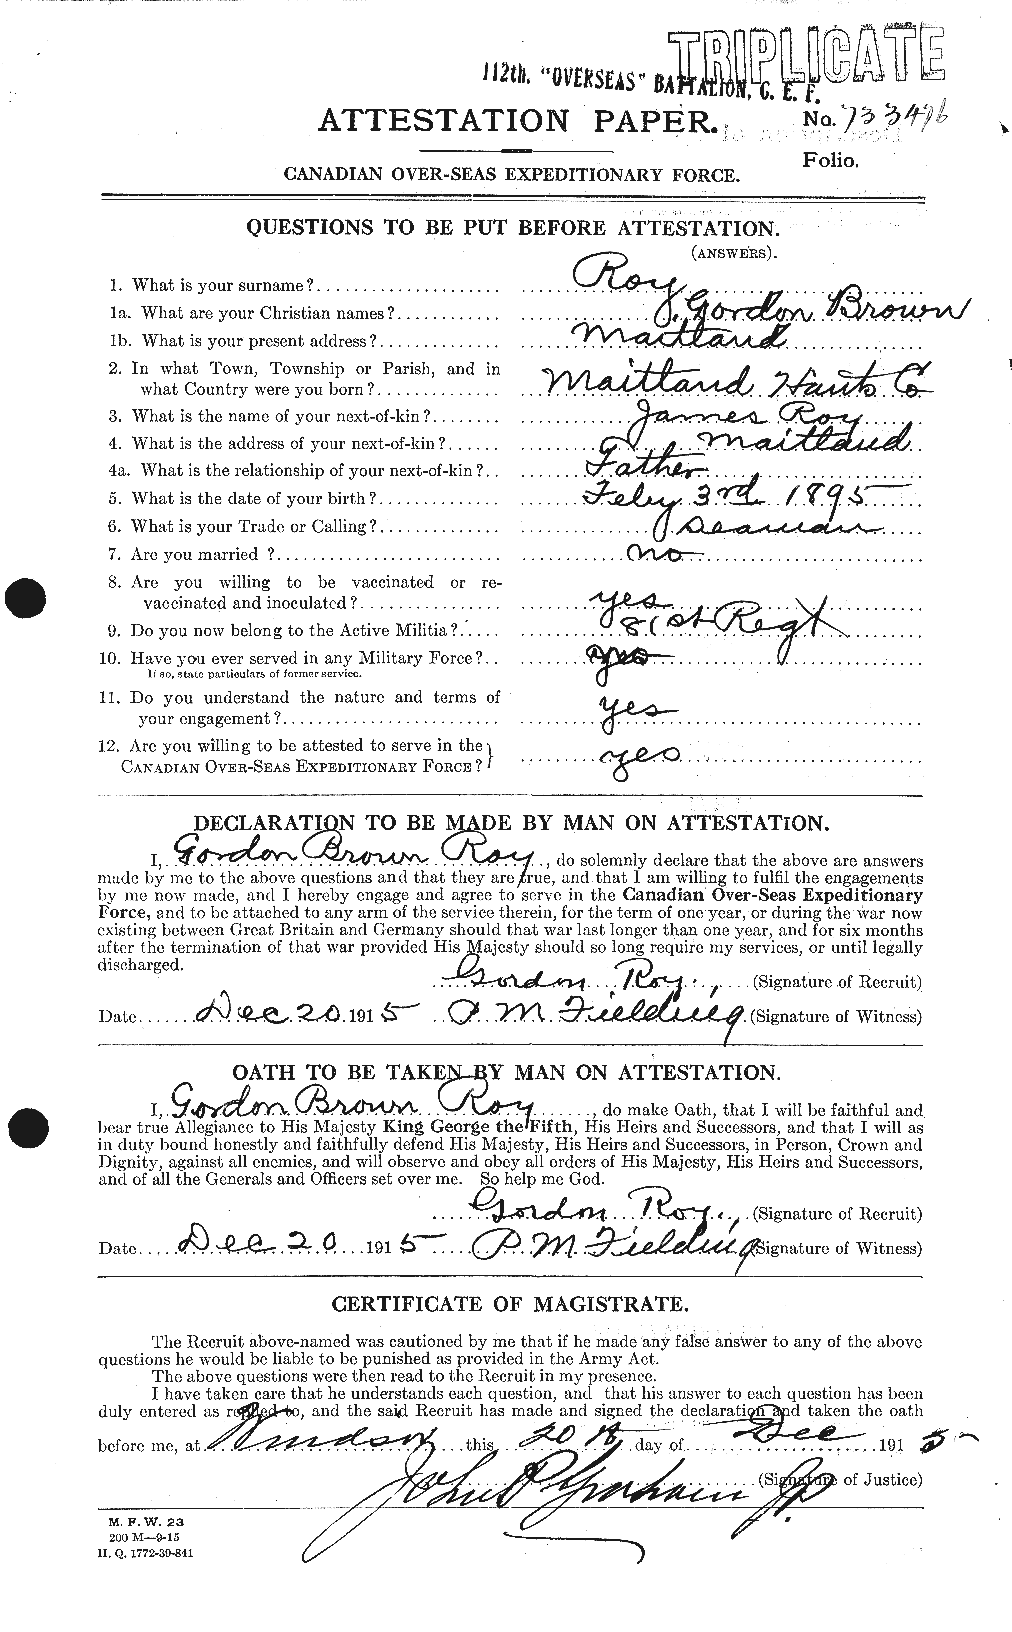 Personnel Records of the First World War - CEF 616669a